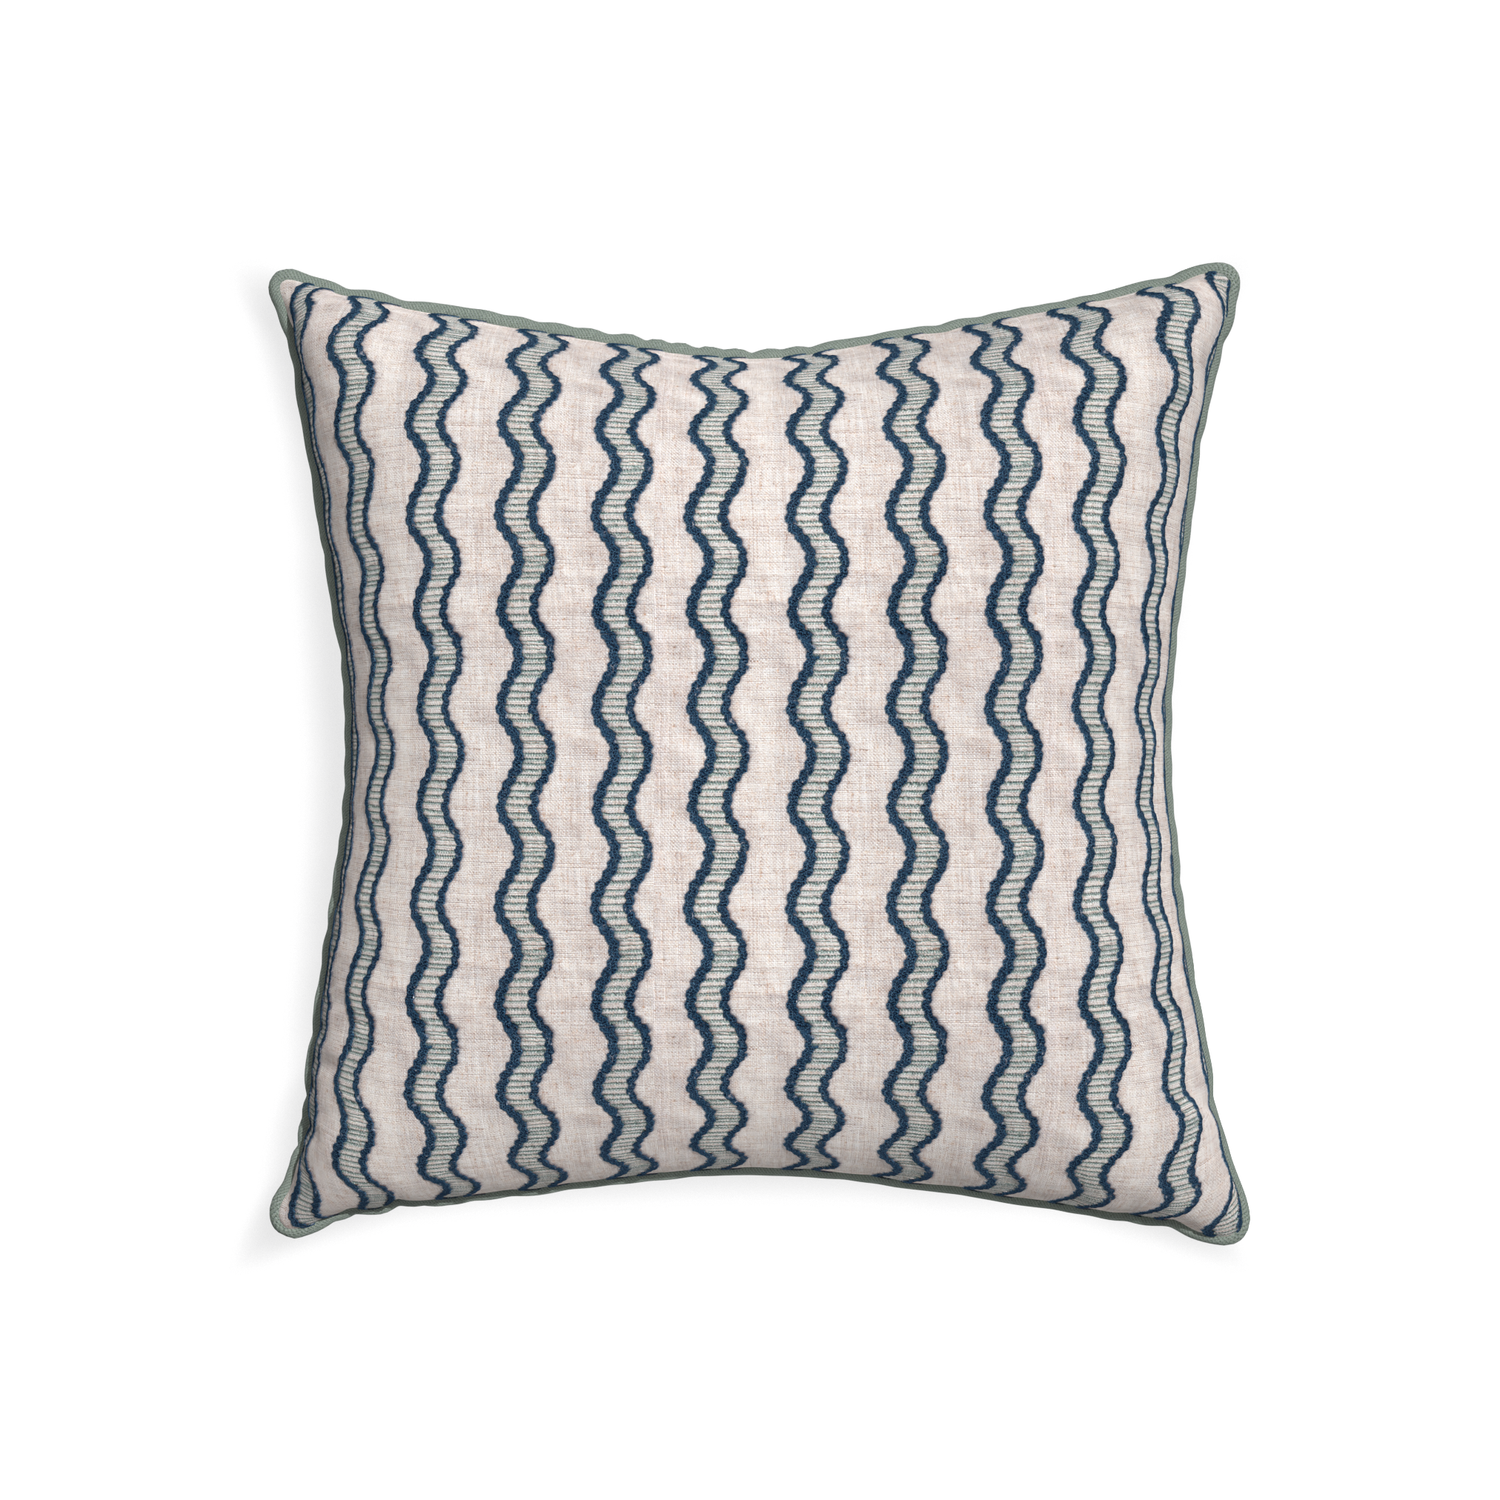 22-square beatrice custom embroidered wavepillow with sage piping on white background